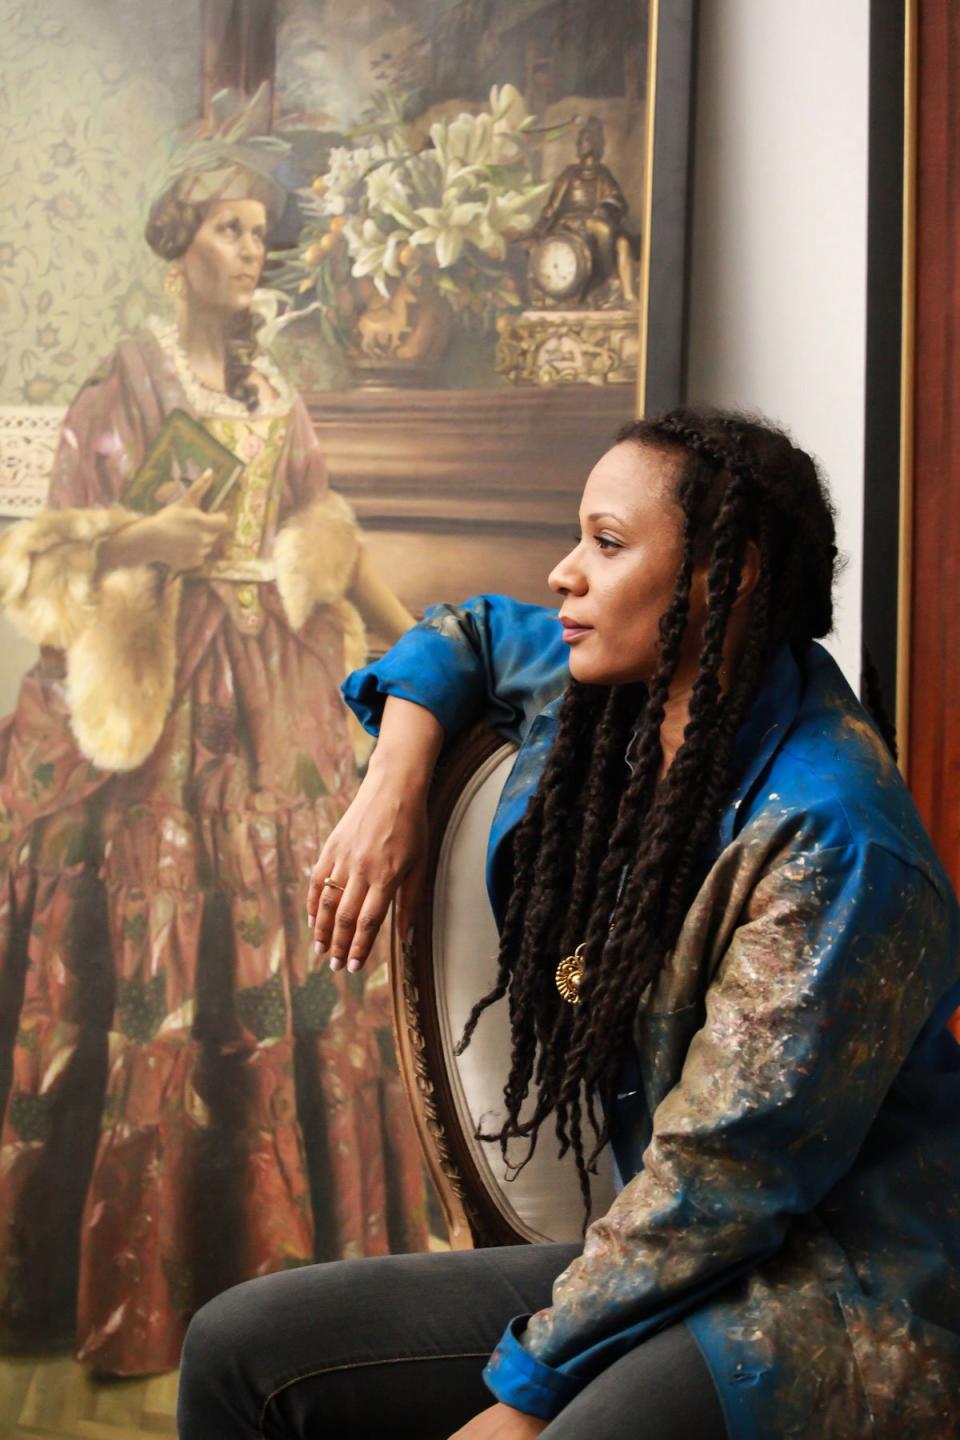 "Don’t wait for encouragement, don't wait for inspiration, don’t wait for your muse. Show up to your easel, page, or instrument, and start. It’s the hardest part," says artist Elizabeth Colomba whose work is on display in New York's Gracie Mansion as part of the "She Persists" exhibit.